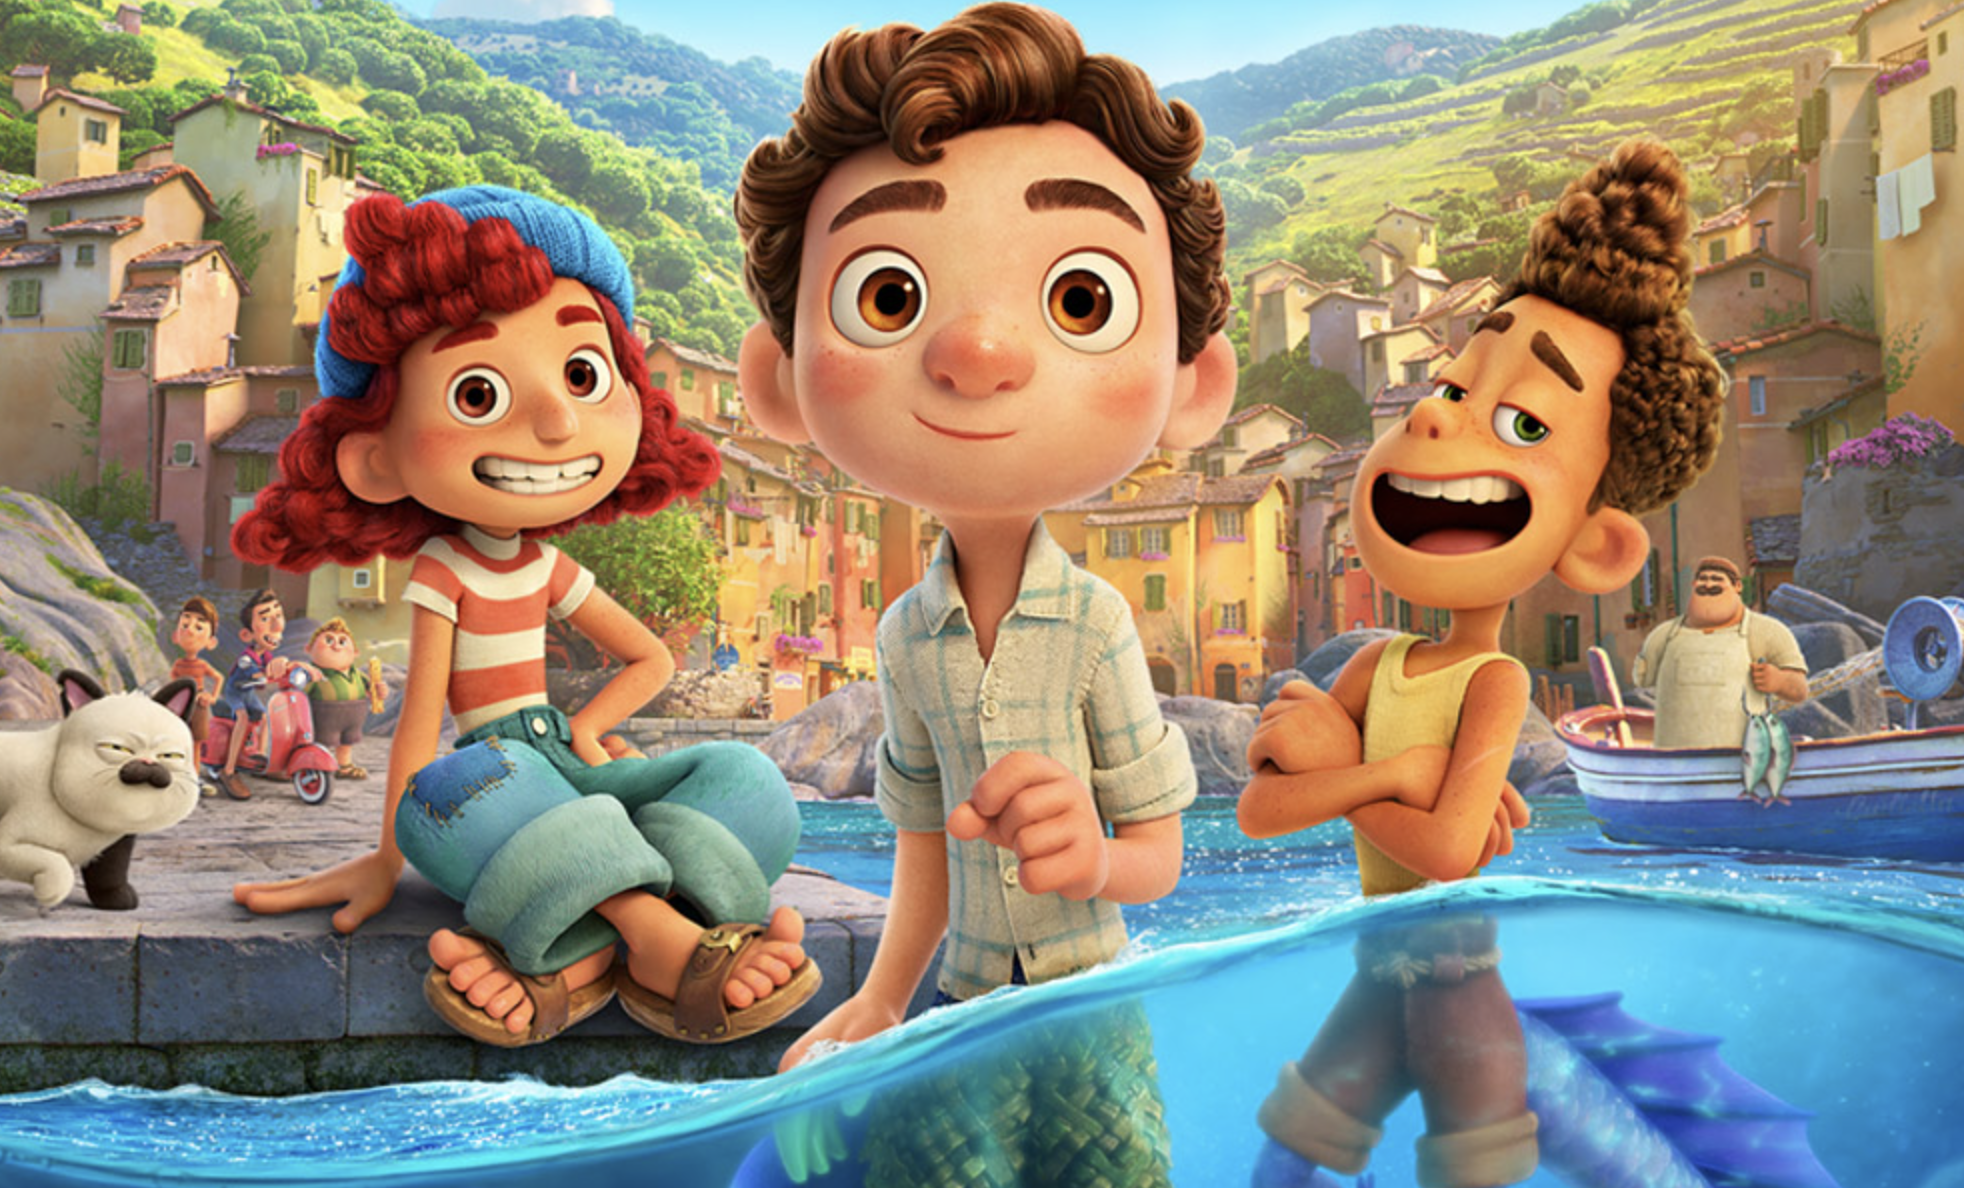 ‘Luca’ Review: (Still) A Vivid, Enchanting Animated Tale